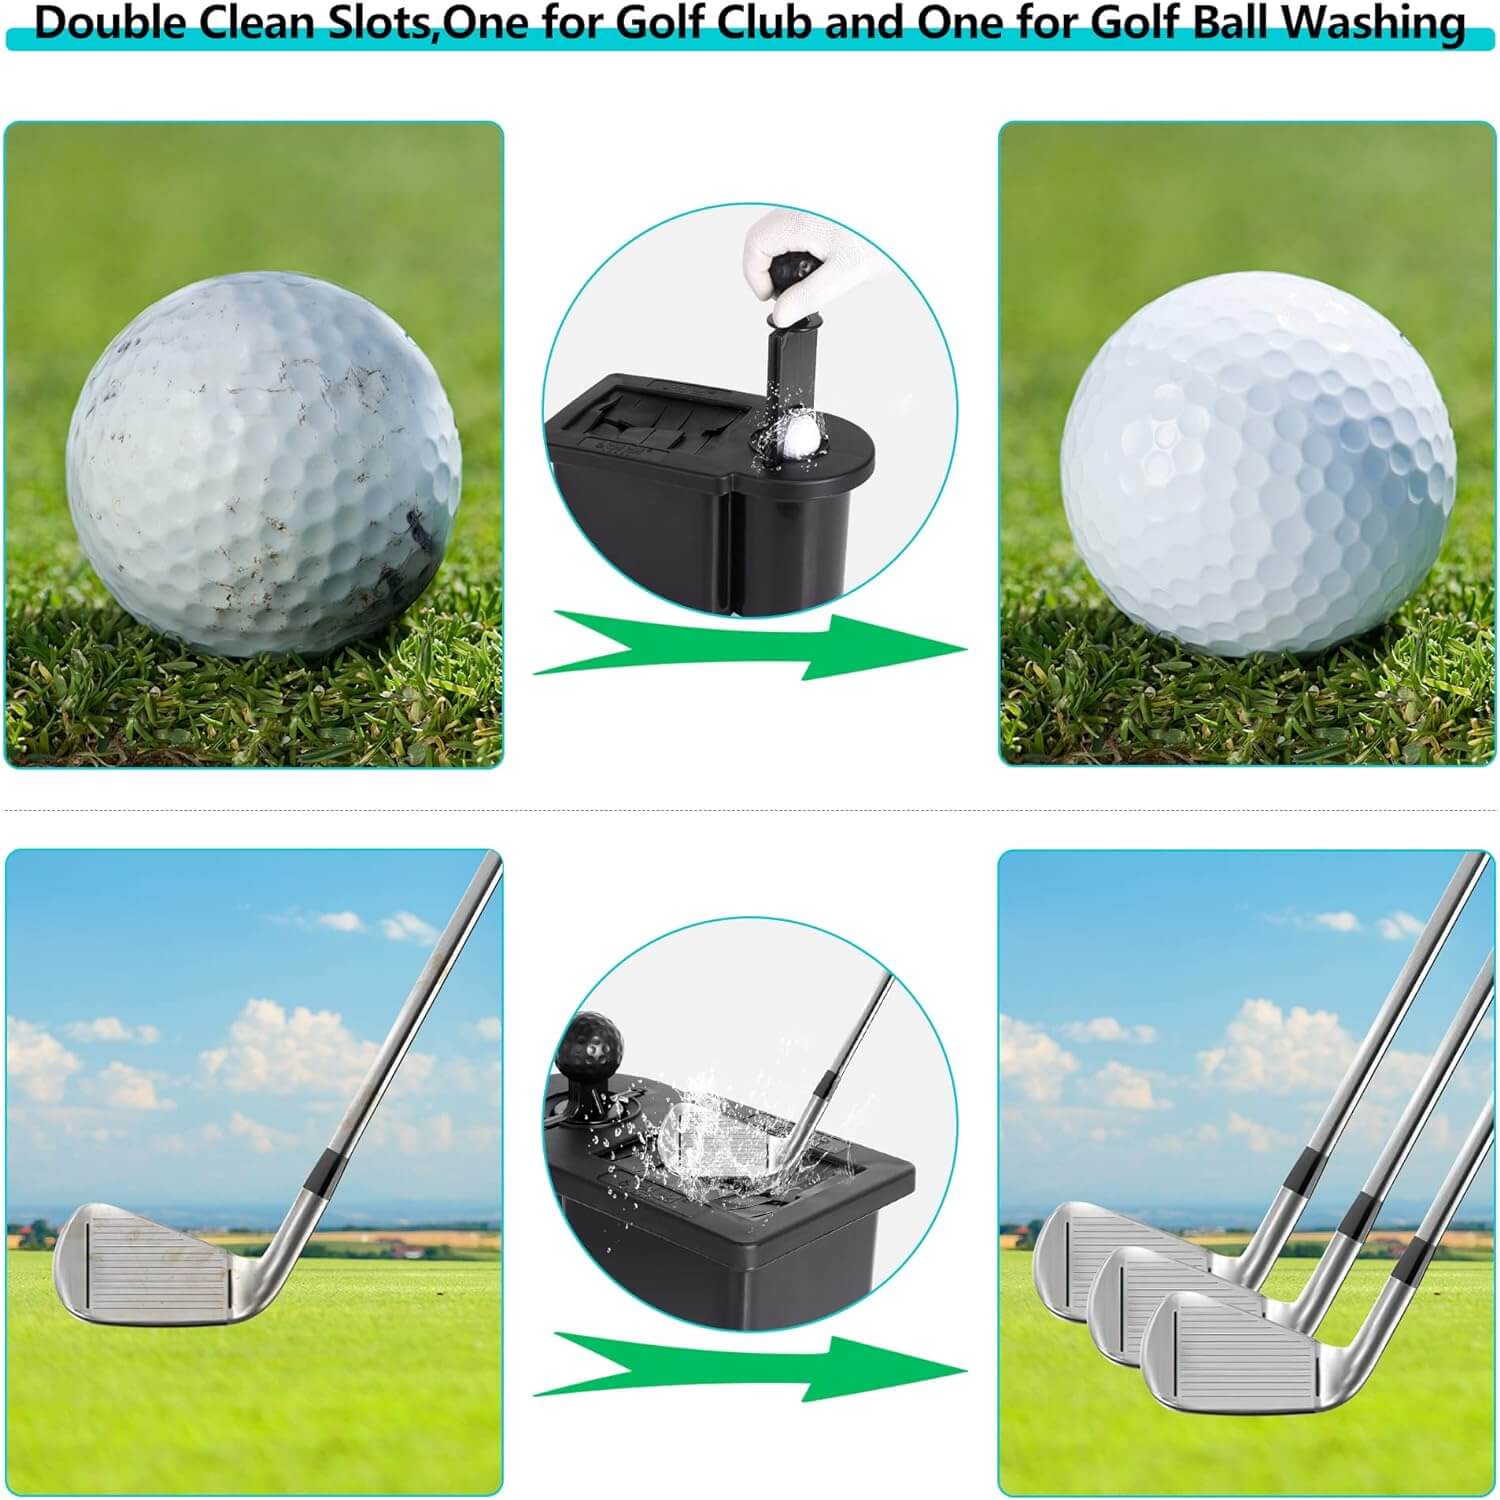 Golf ball and club cleaning kit